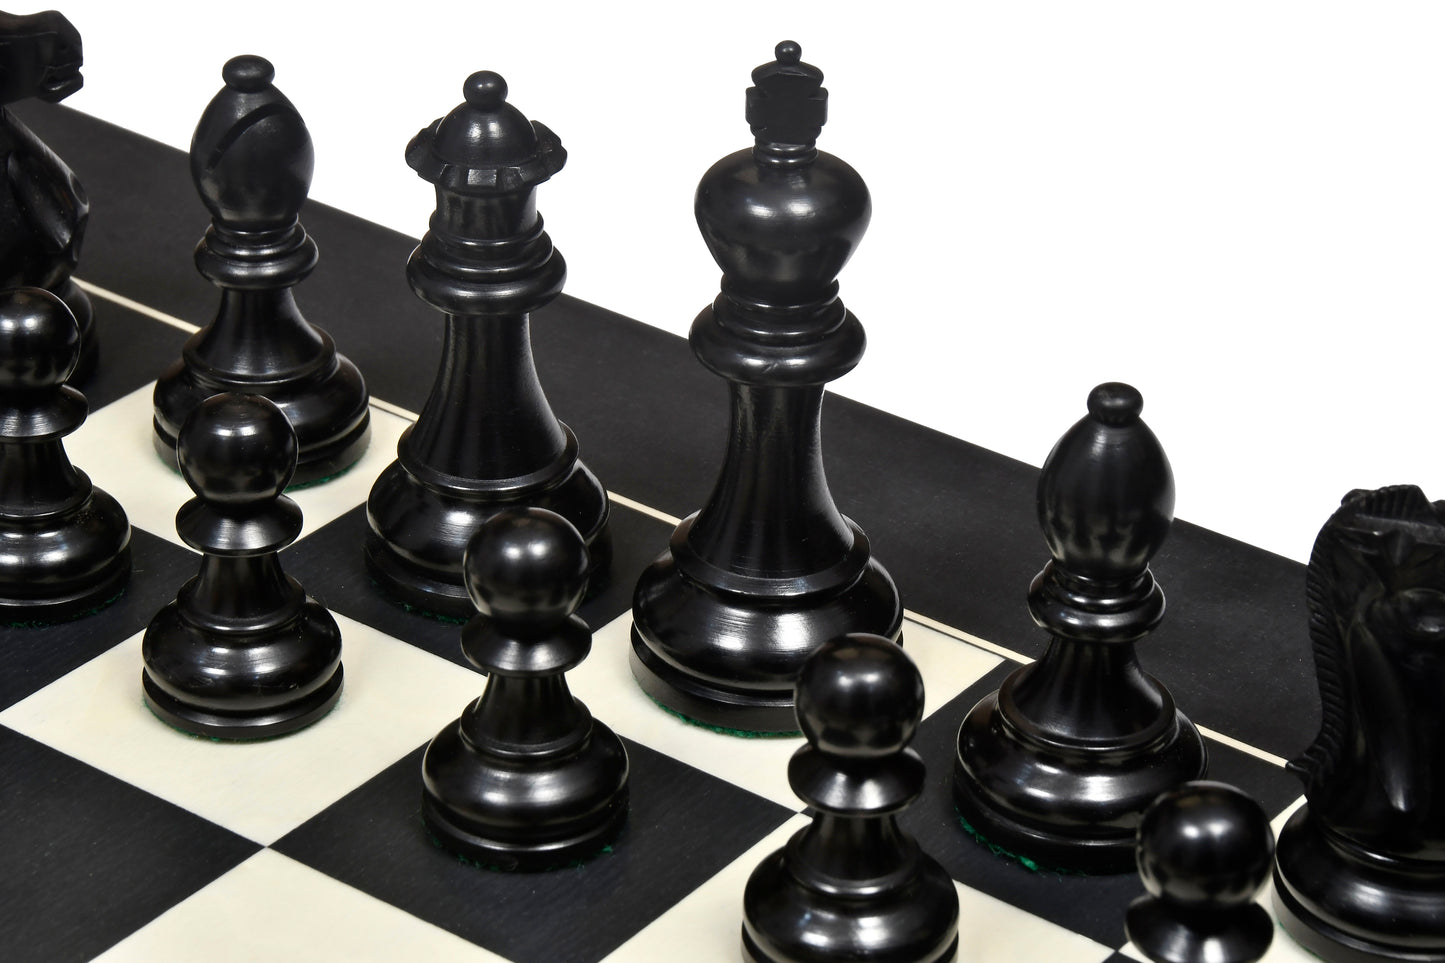 The American Staunton Series Weighted Tournament Chess Pieces in Ebonized Boxwood & Boxwood - 4.1" King